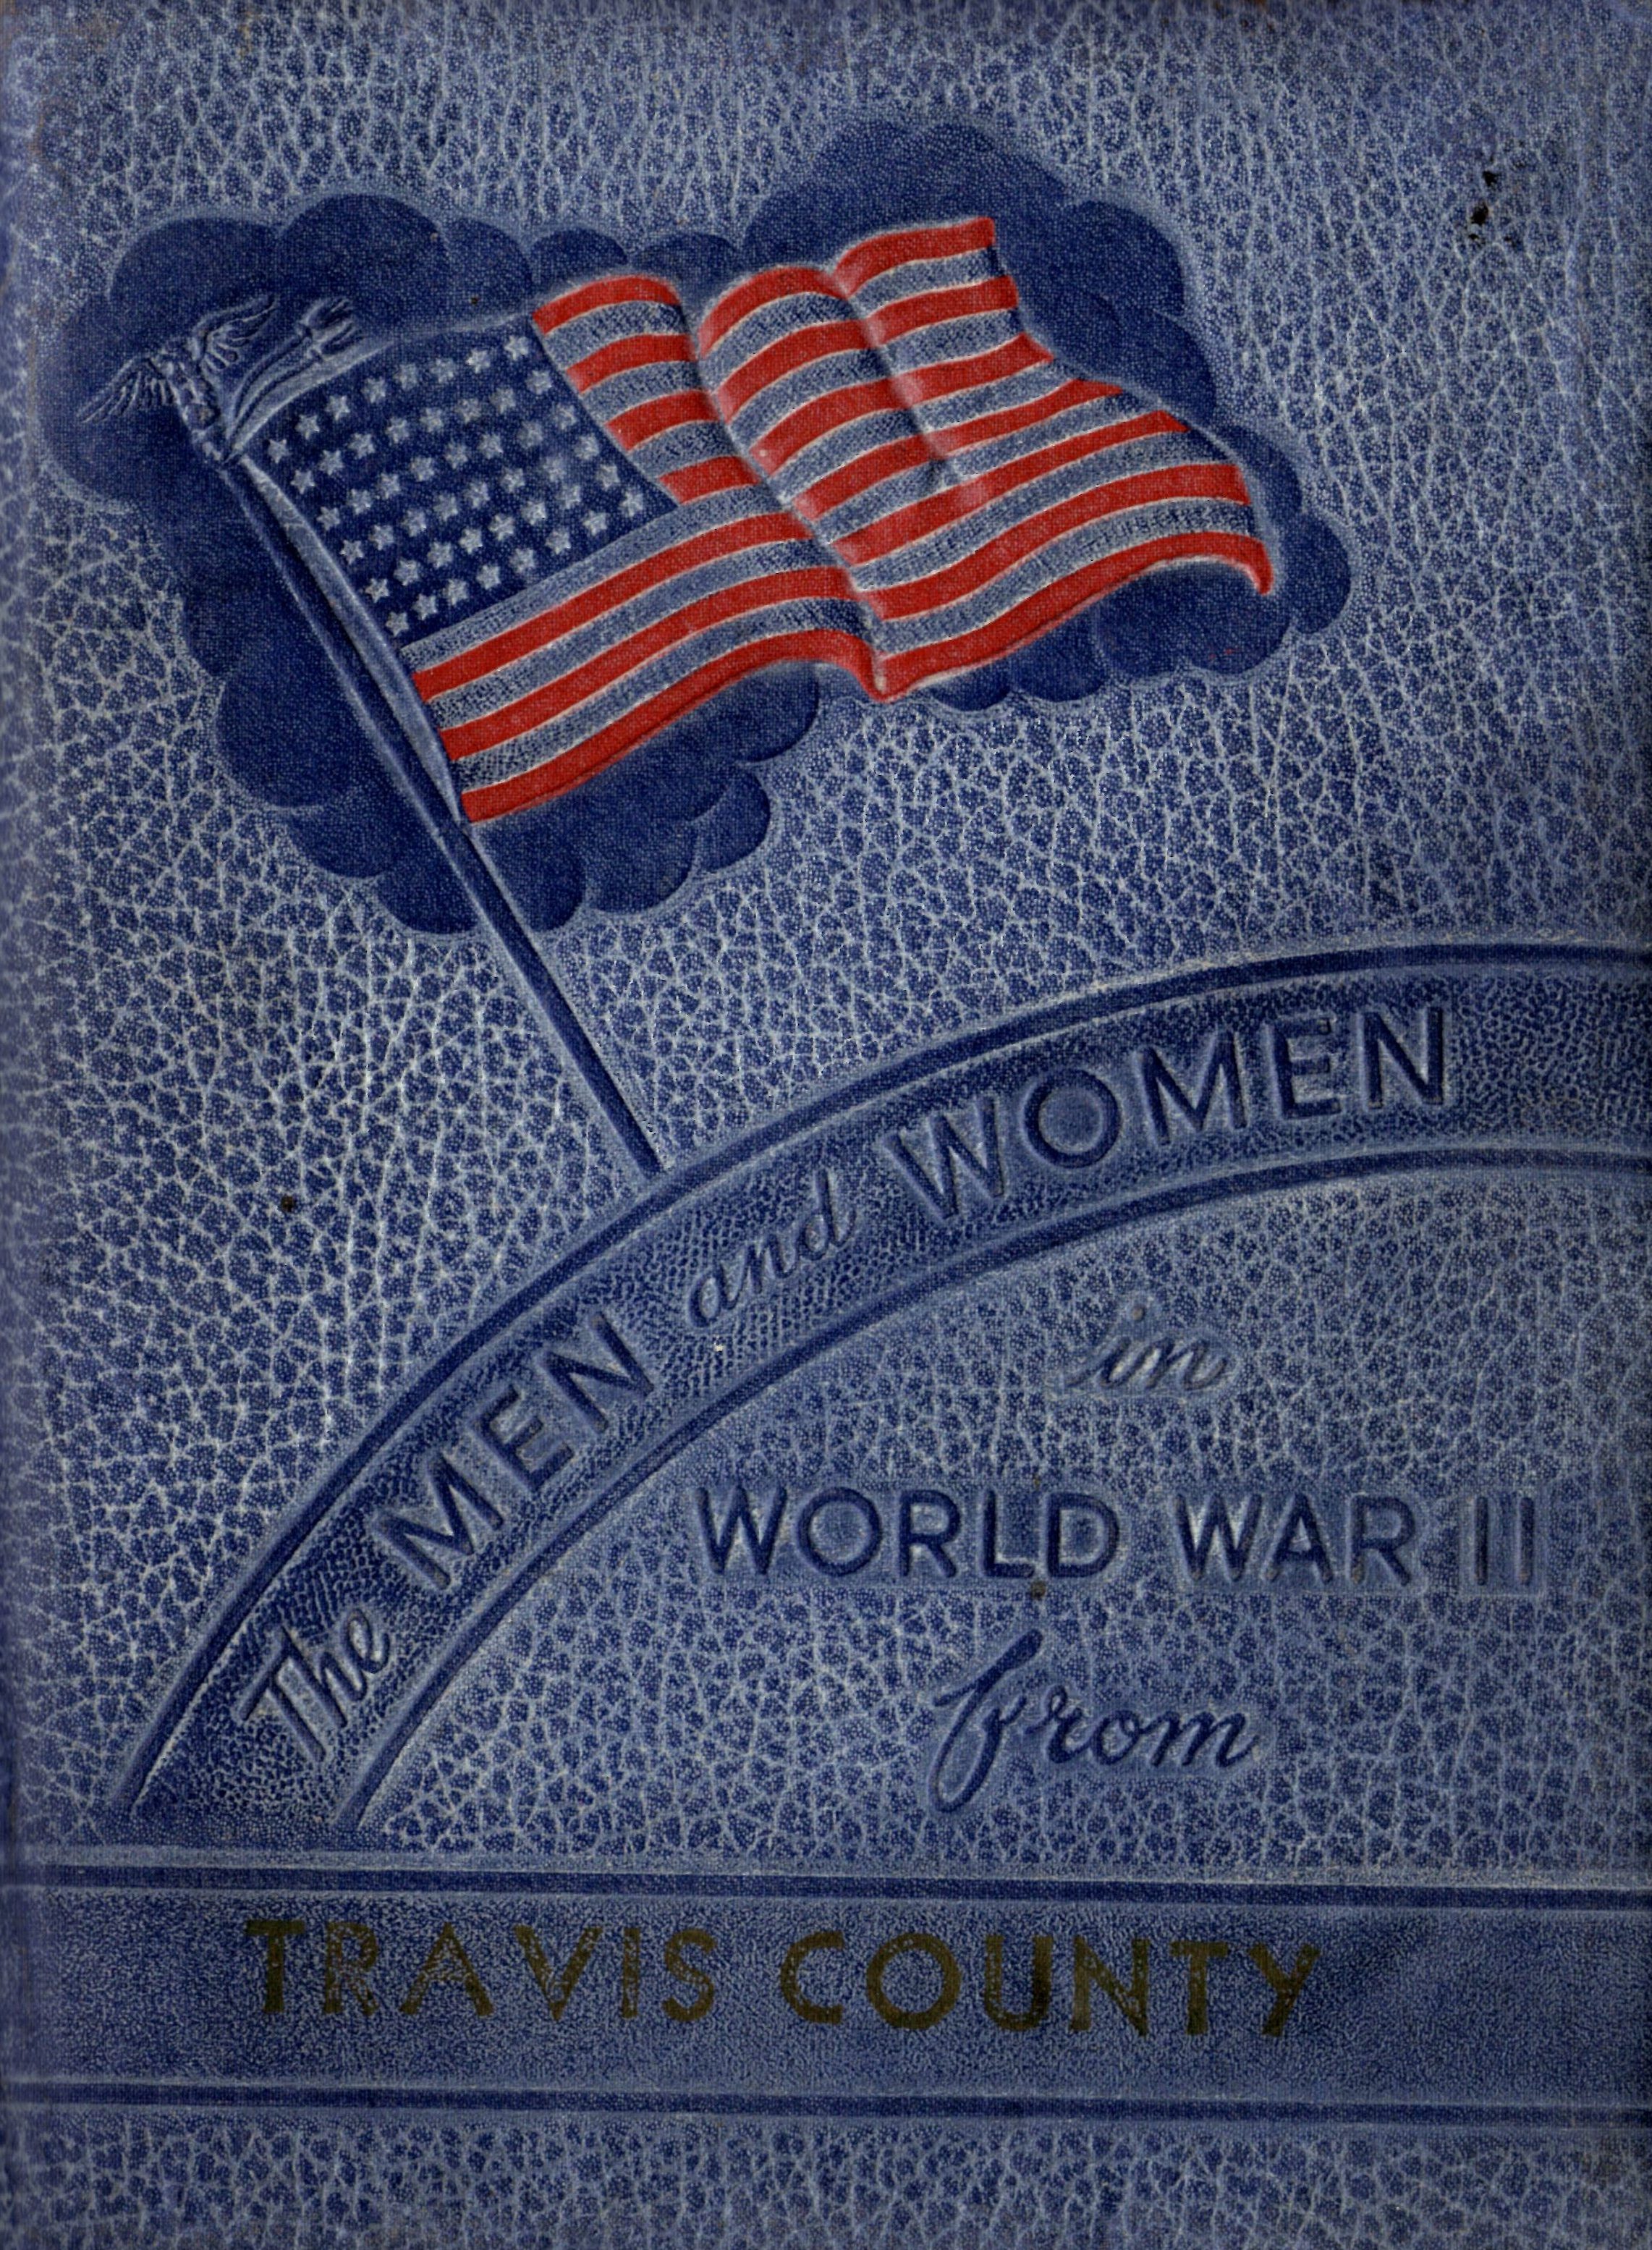 Men and women in the Armed Forces from Travis County Texas WW2 WWII World War Two II 2